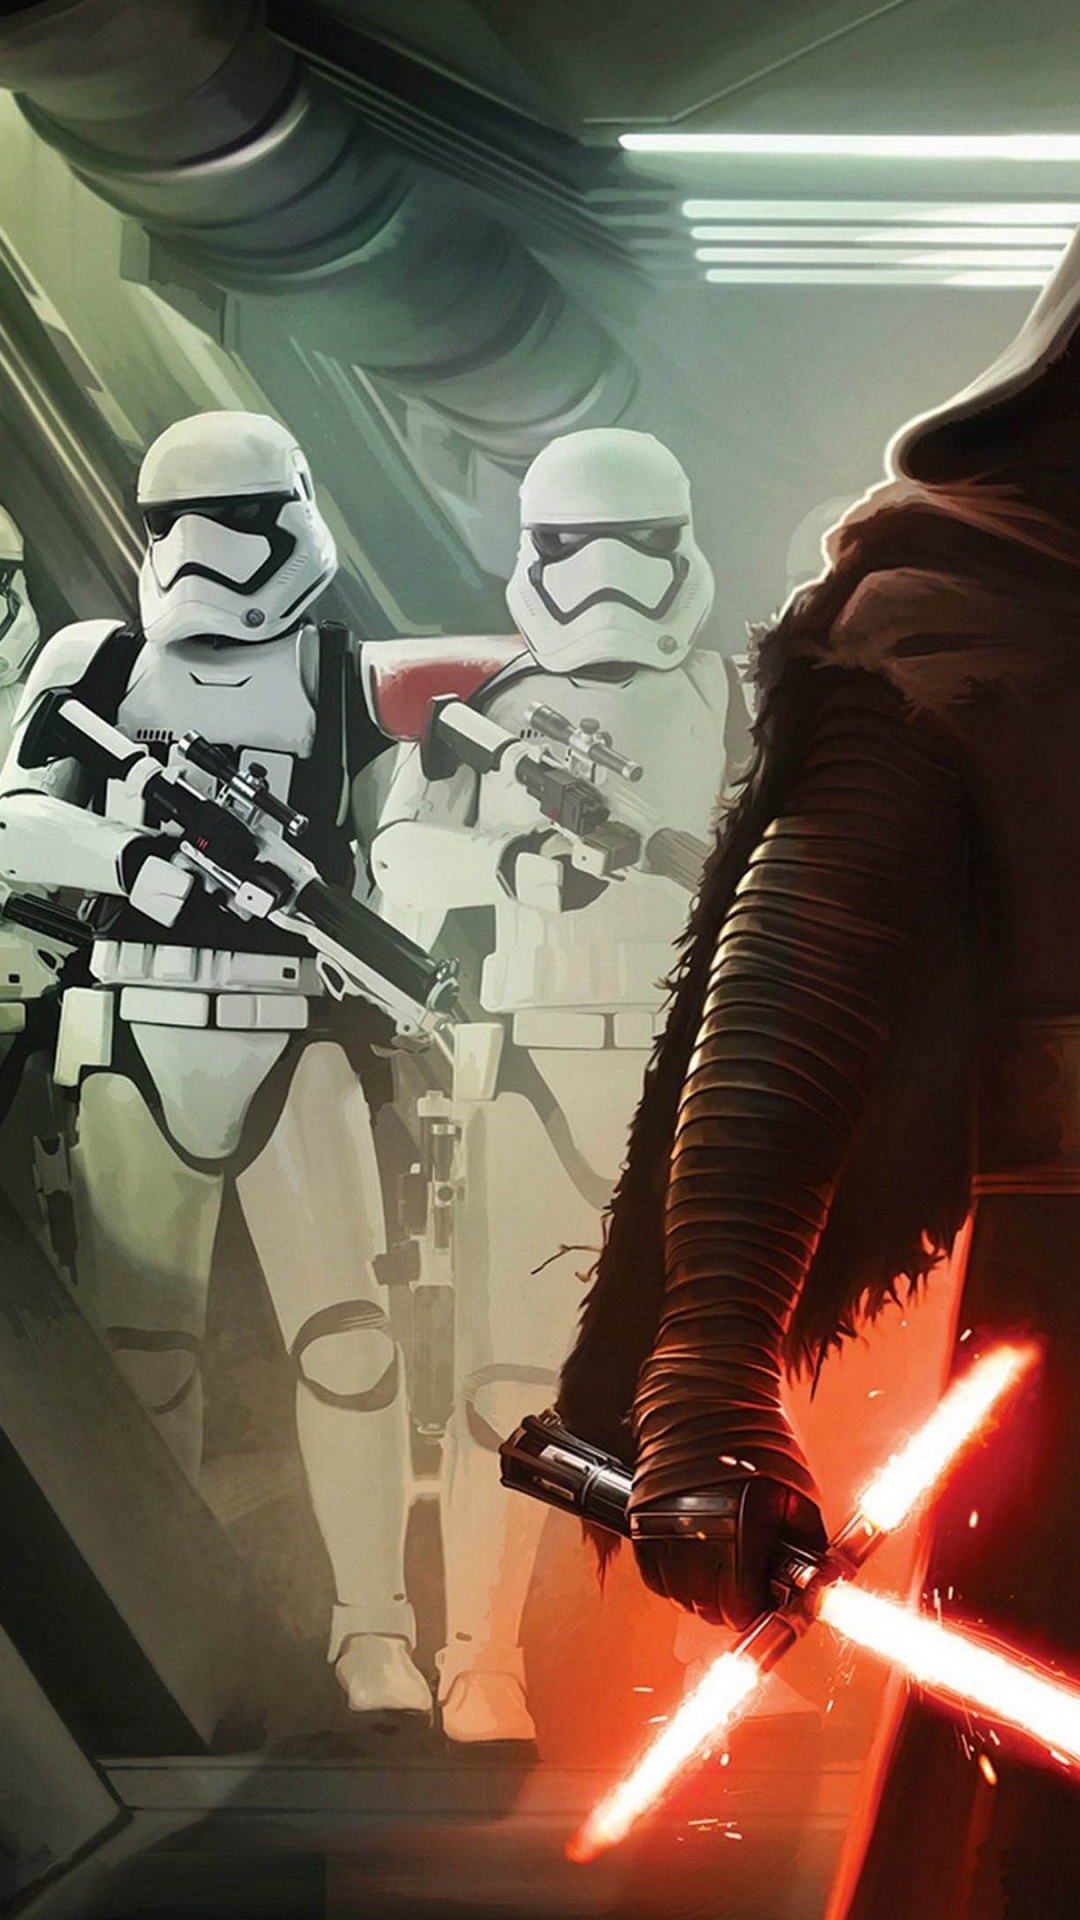 75 Star Wars Wallpaper Backgrounds For iPhone To Download Free 